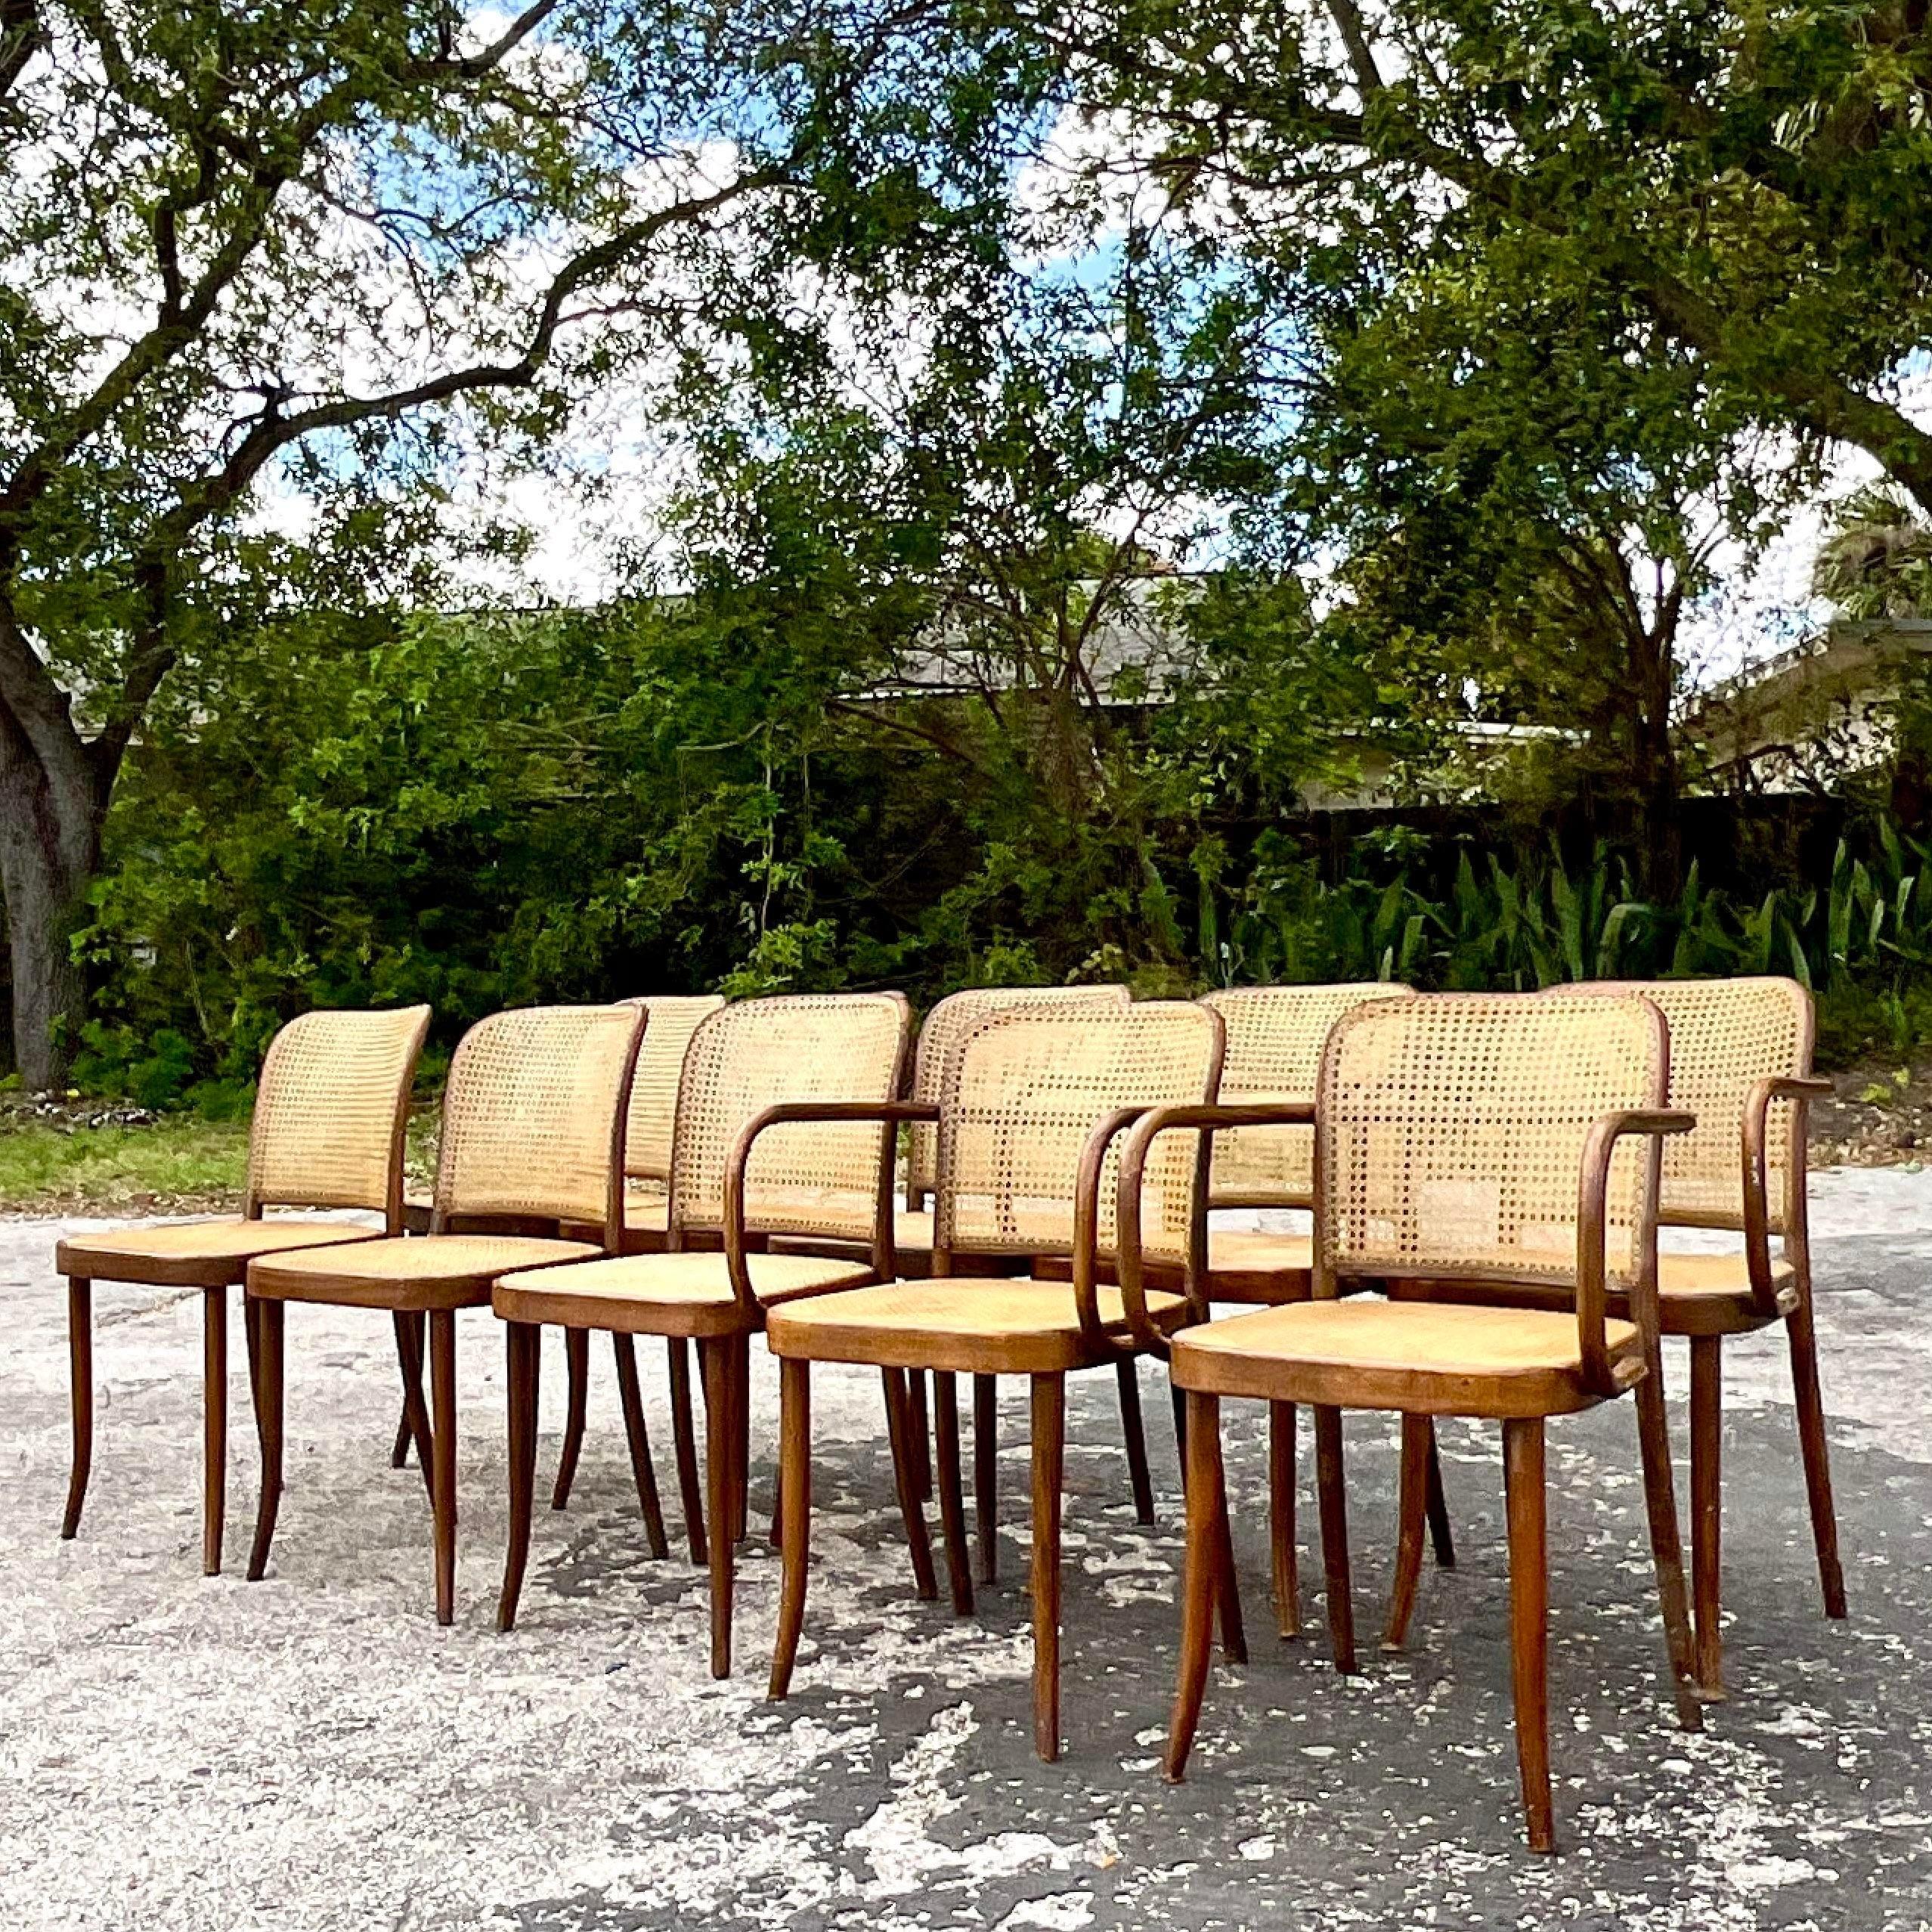 A fantastic set of 10 vintage Boho dining chairs. Designed by the iconic Josef Hoffmann for Stendig and tagged on the bottom. Chic inset cane panels. Four arms and six side chairs. Acquired from a Palm Beach estate.

Side chair 17.5x15.5x31.5